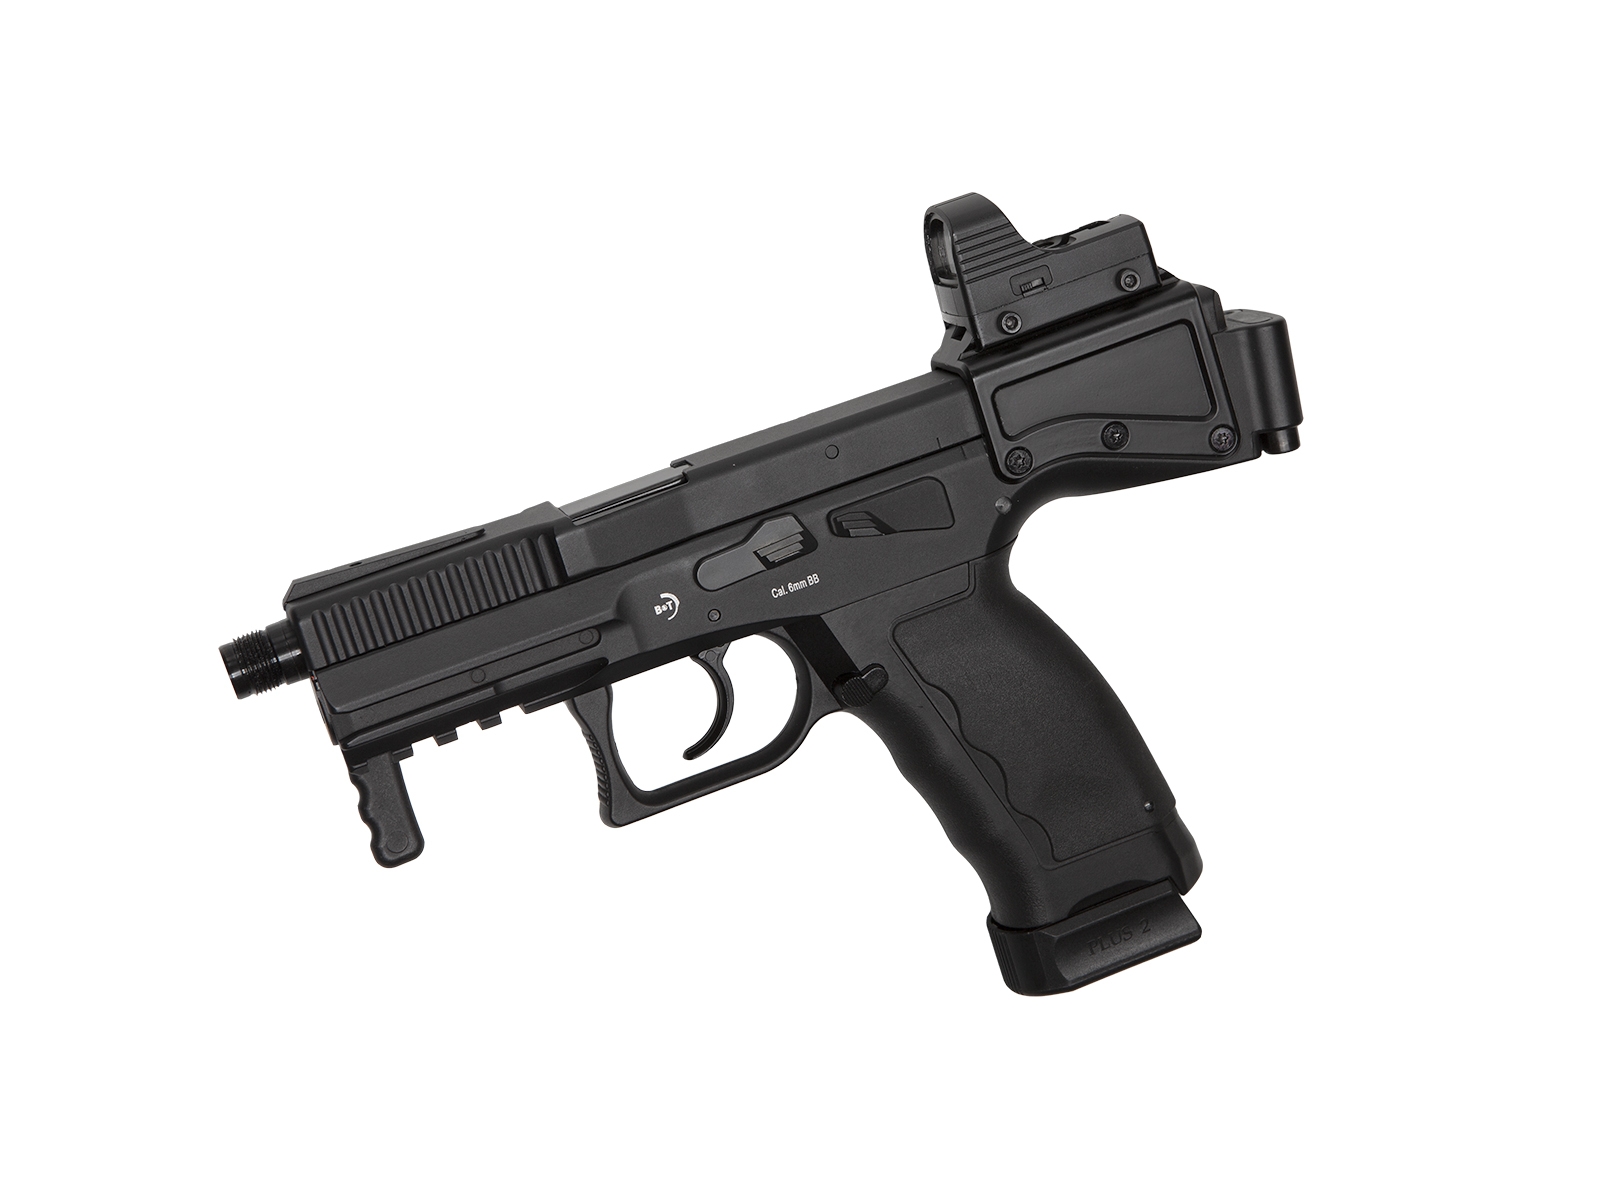 ASG%20B&T%20USW%20A1%20CO2%20Airsoft%20Tabanca%2019125